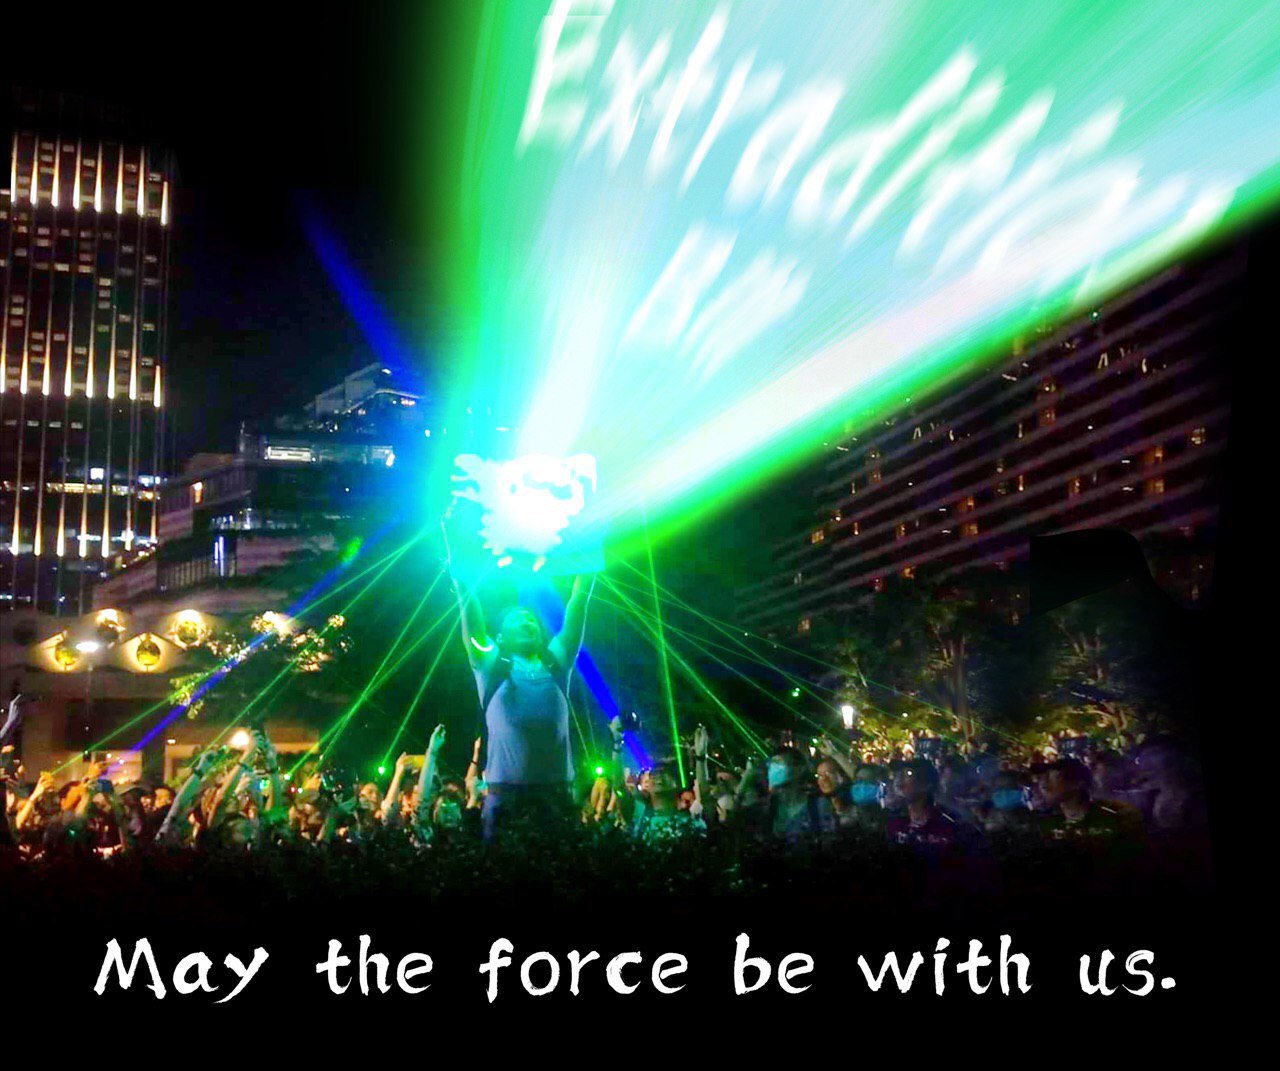 Modified photograph of a protestor holding up a reflector, on which other people are aiming blue and green laser pointers. The beam from the reflector has been edited to read "Extradition Bill" in white. The image is captioned, "May the force be with us."